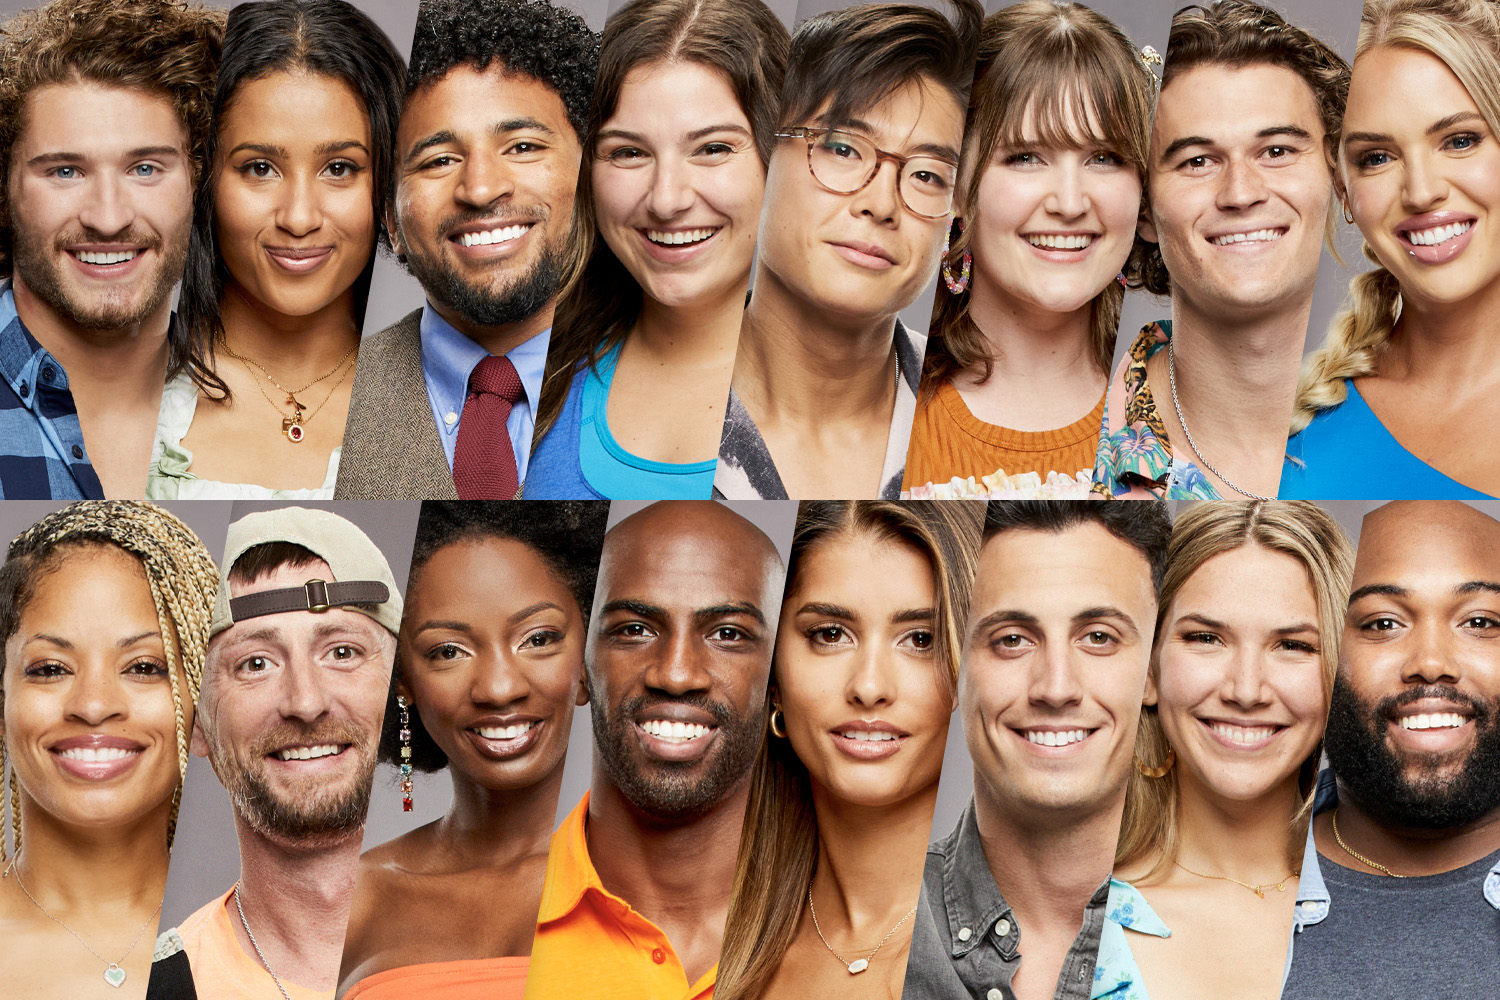 Big Brother 23 Finale And Winner Prediction Airing On Wednesday Sept 29 On CBS!